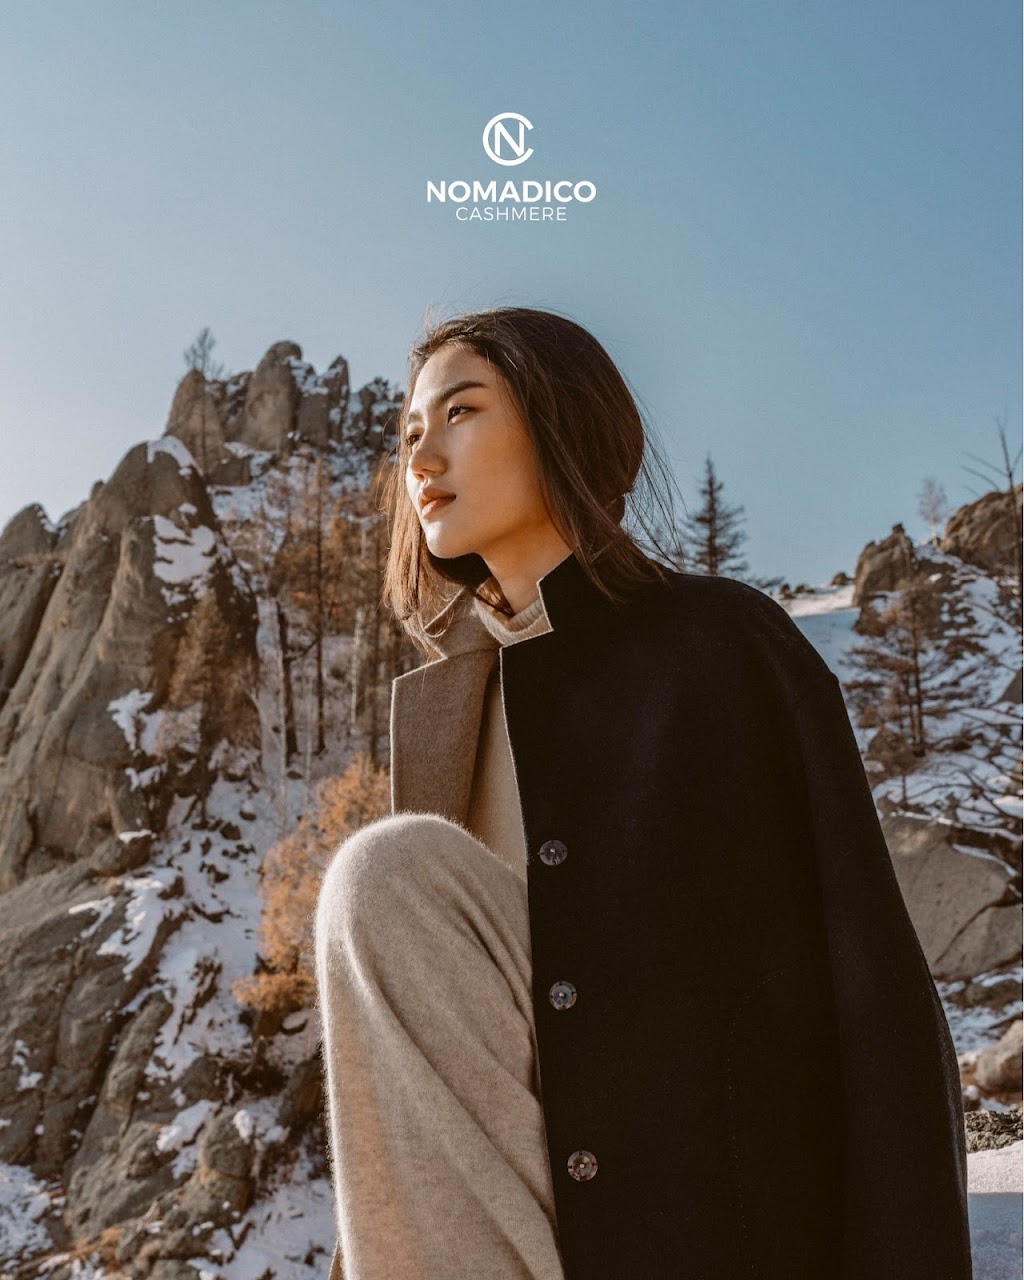 Nomadico Cashmere | 2756 Livermore Outlets Dr, Livermore, CA 94551 | Phone: (925) 699-4141